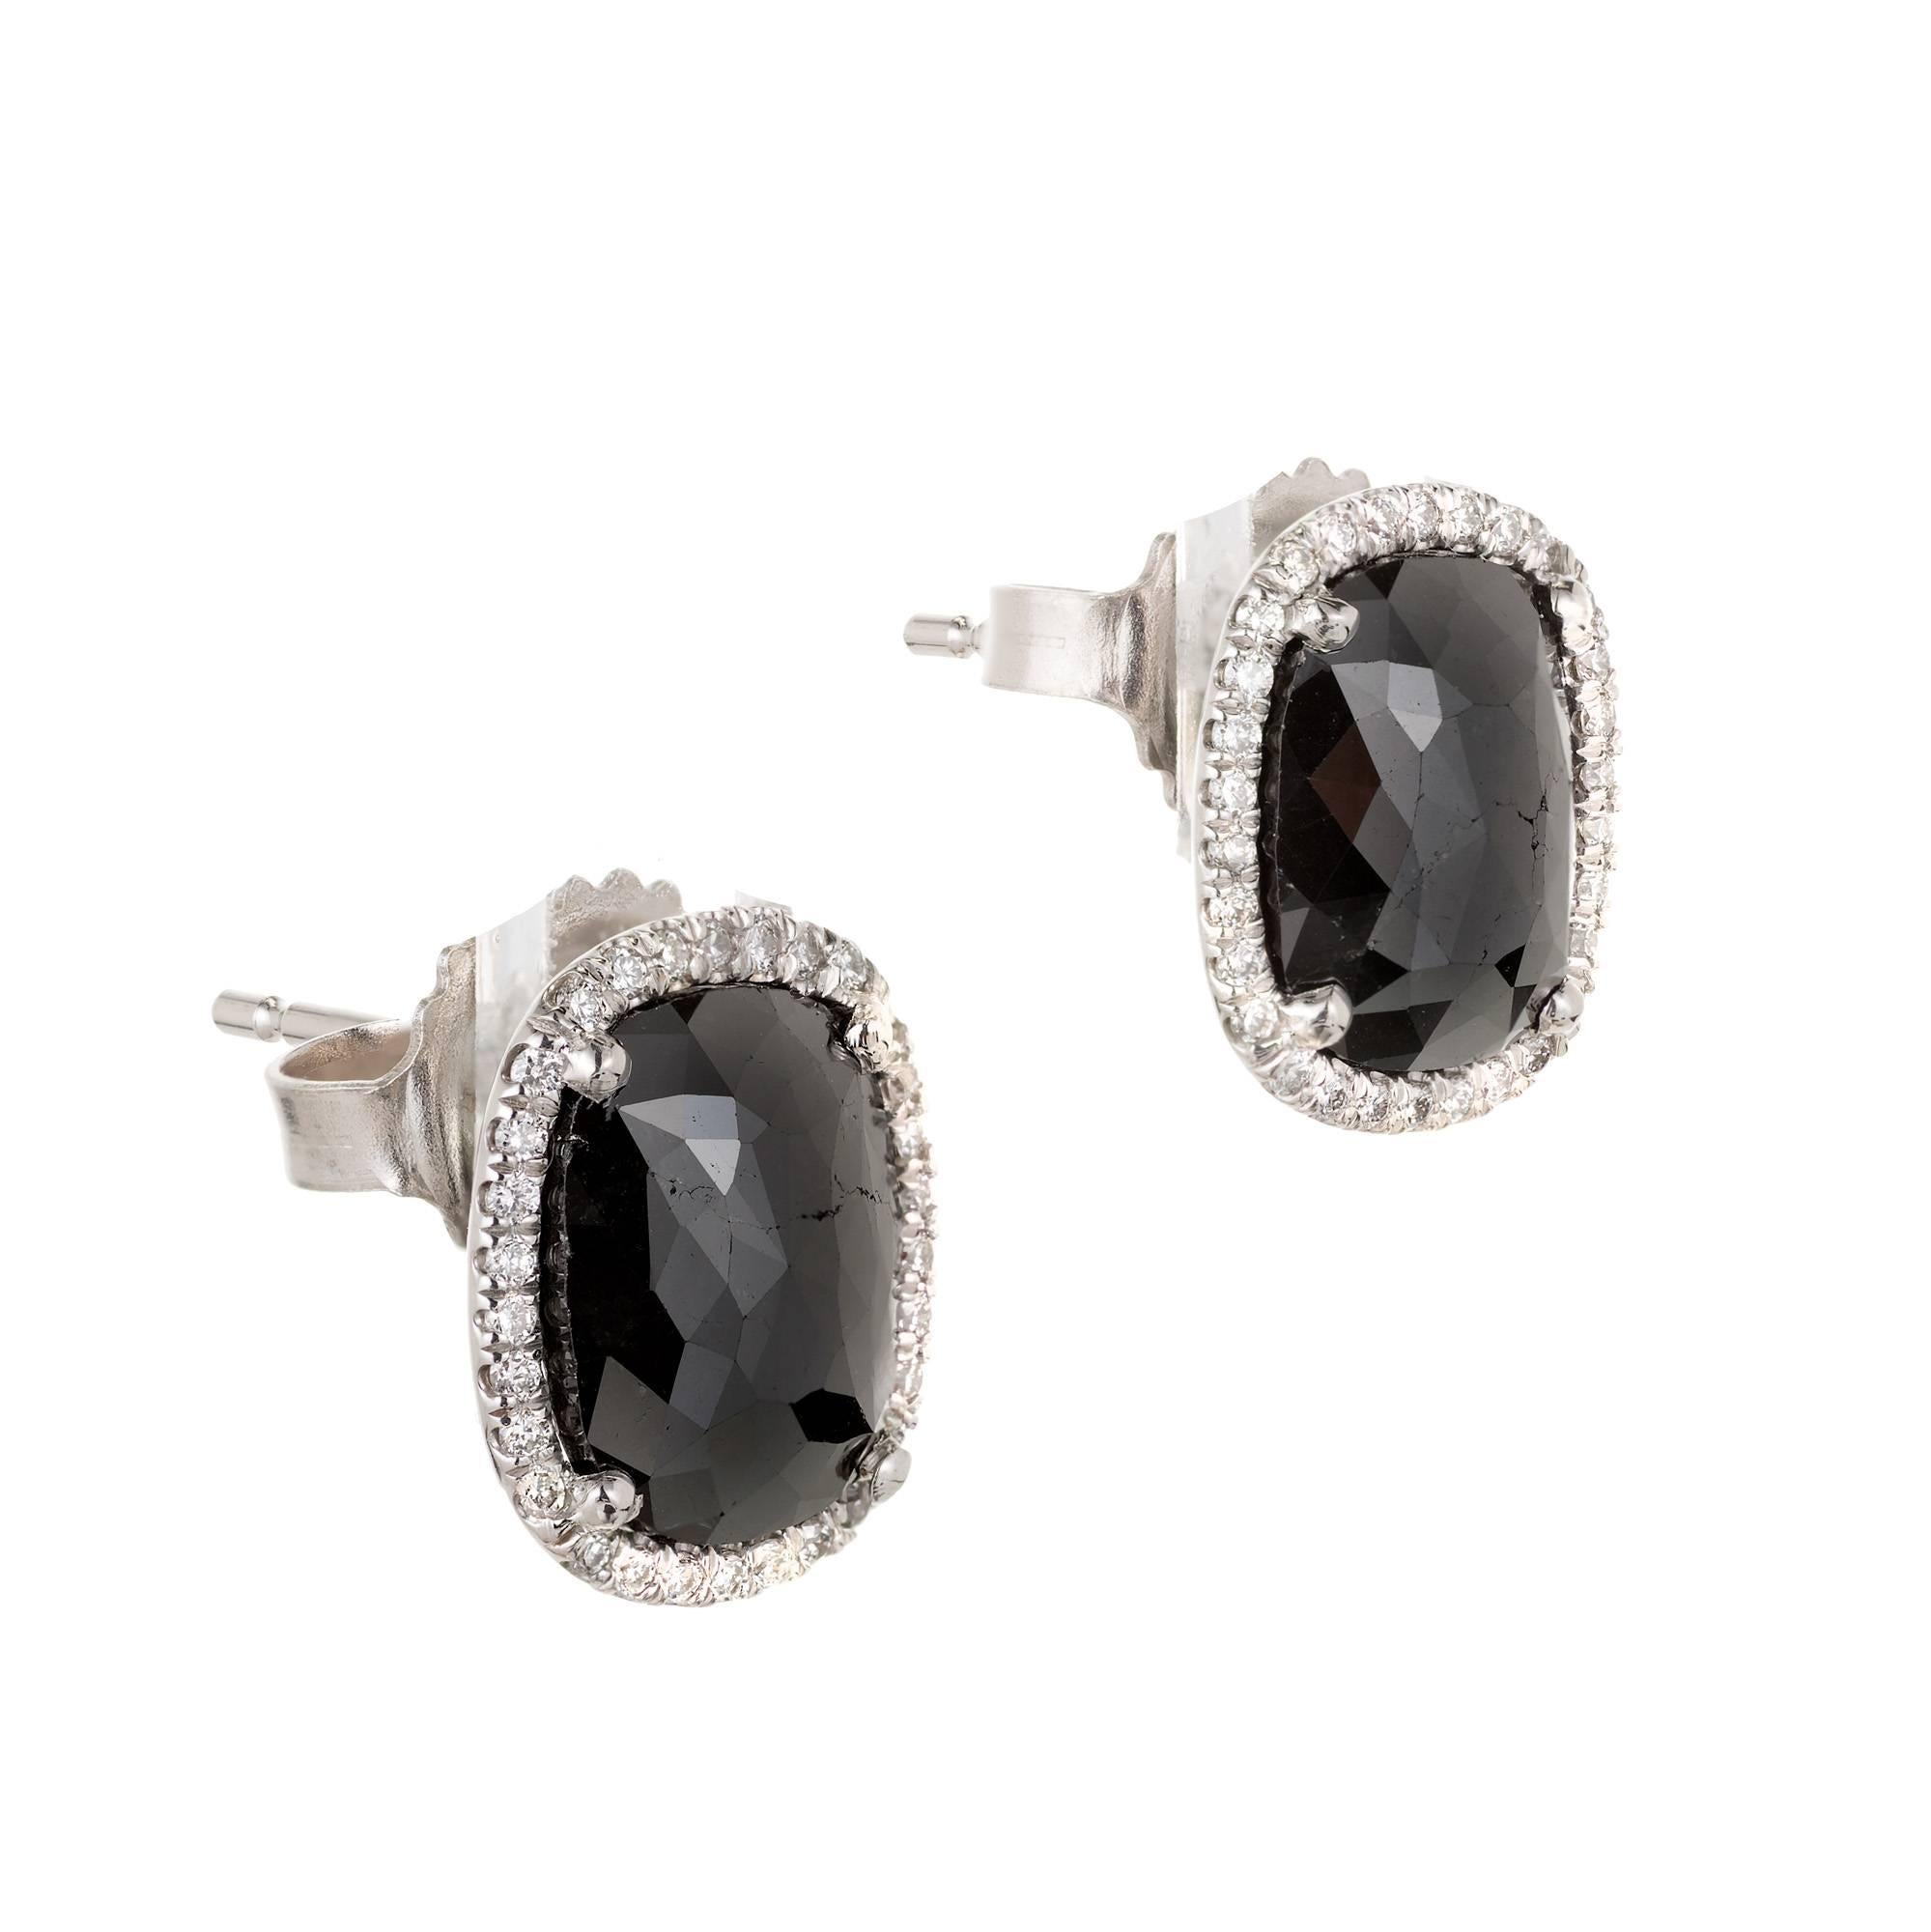  Peter Suchy cushion shape rose cut treated black Diamonds in simple post earrings with full cut Diamonds all around in 18k white gold from the Peter Suchy Workshop. 

1 cushion treated fancy black rose cut black Diamond, approx. total weight